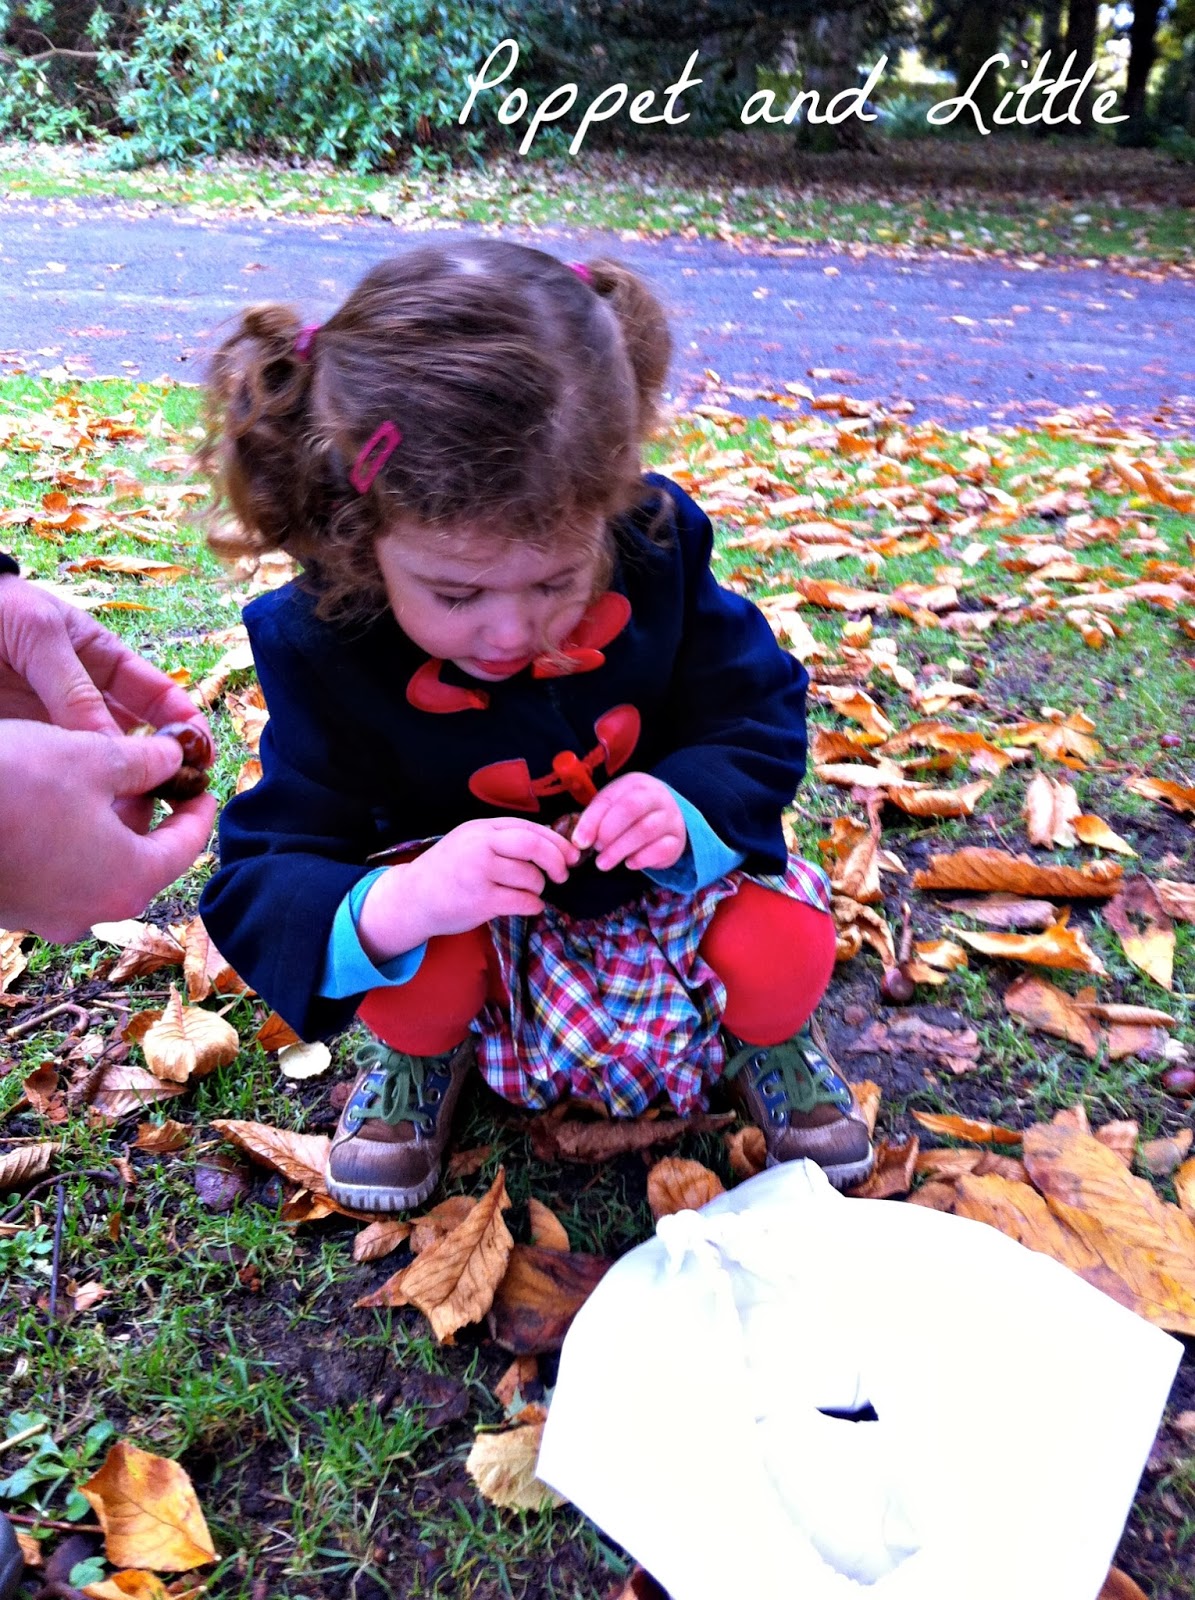 Poppet and Little: Collecting Autumn Treasures